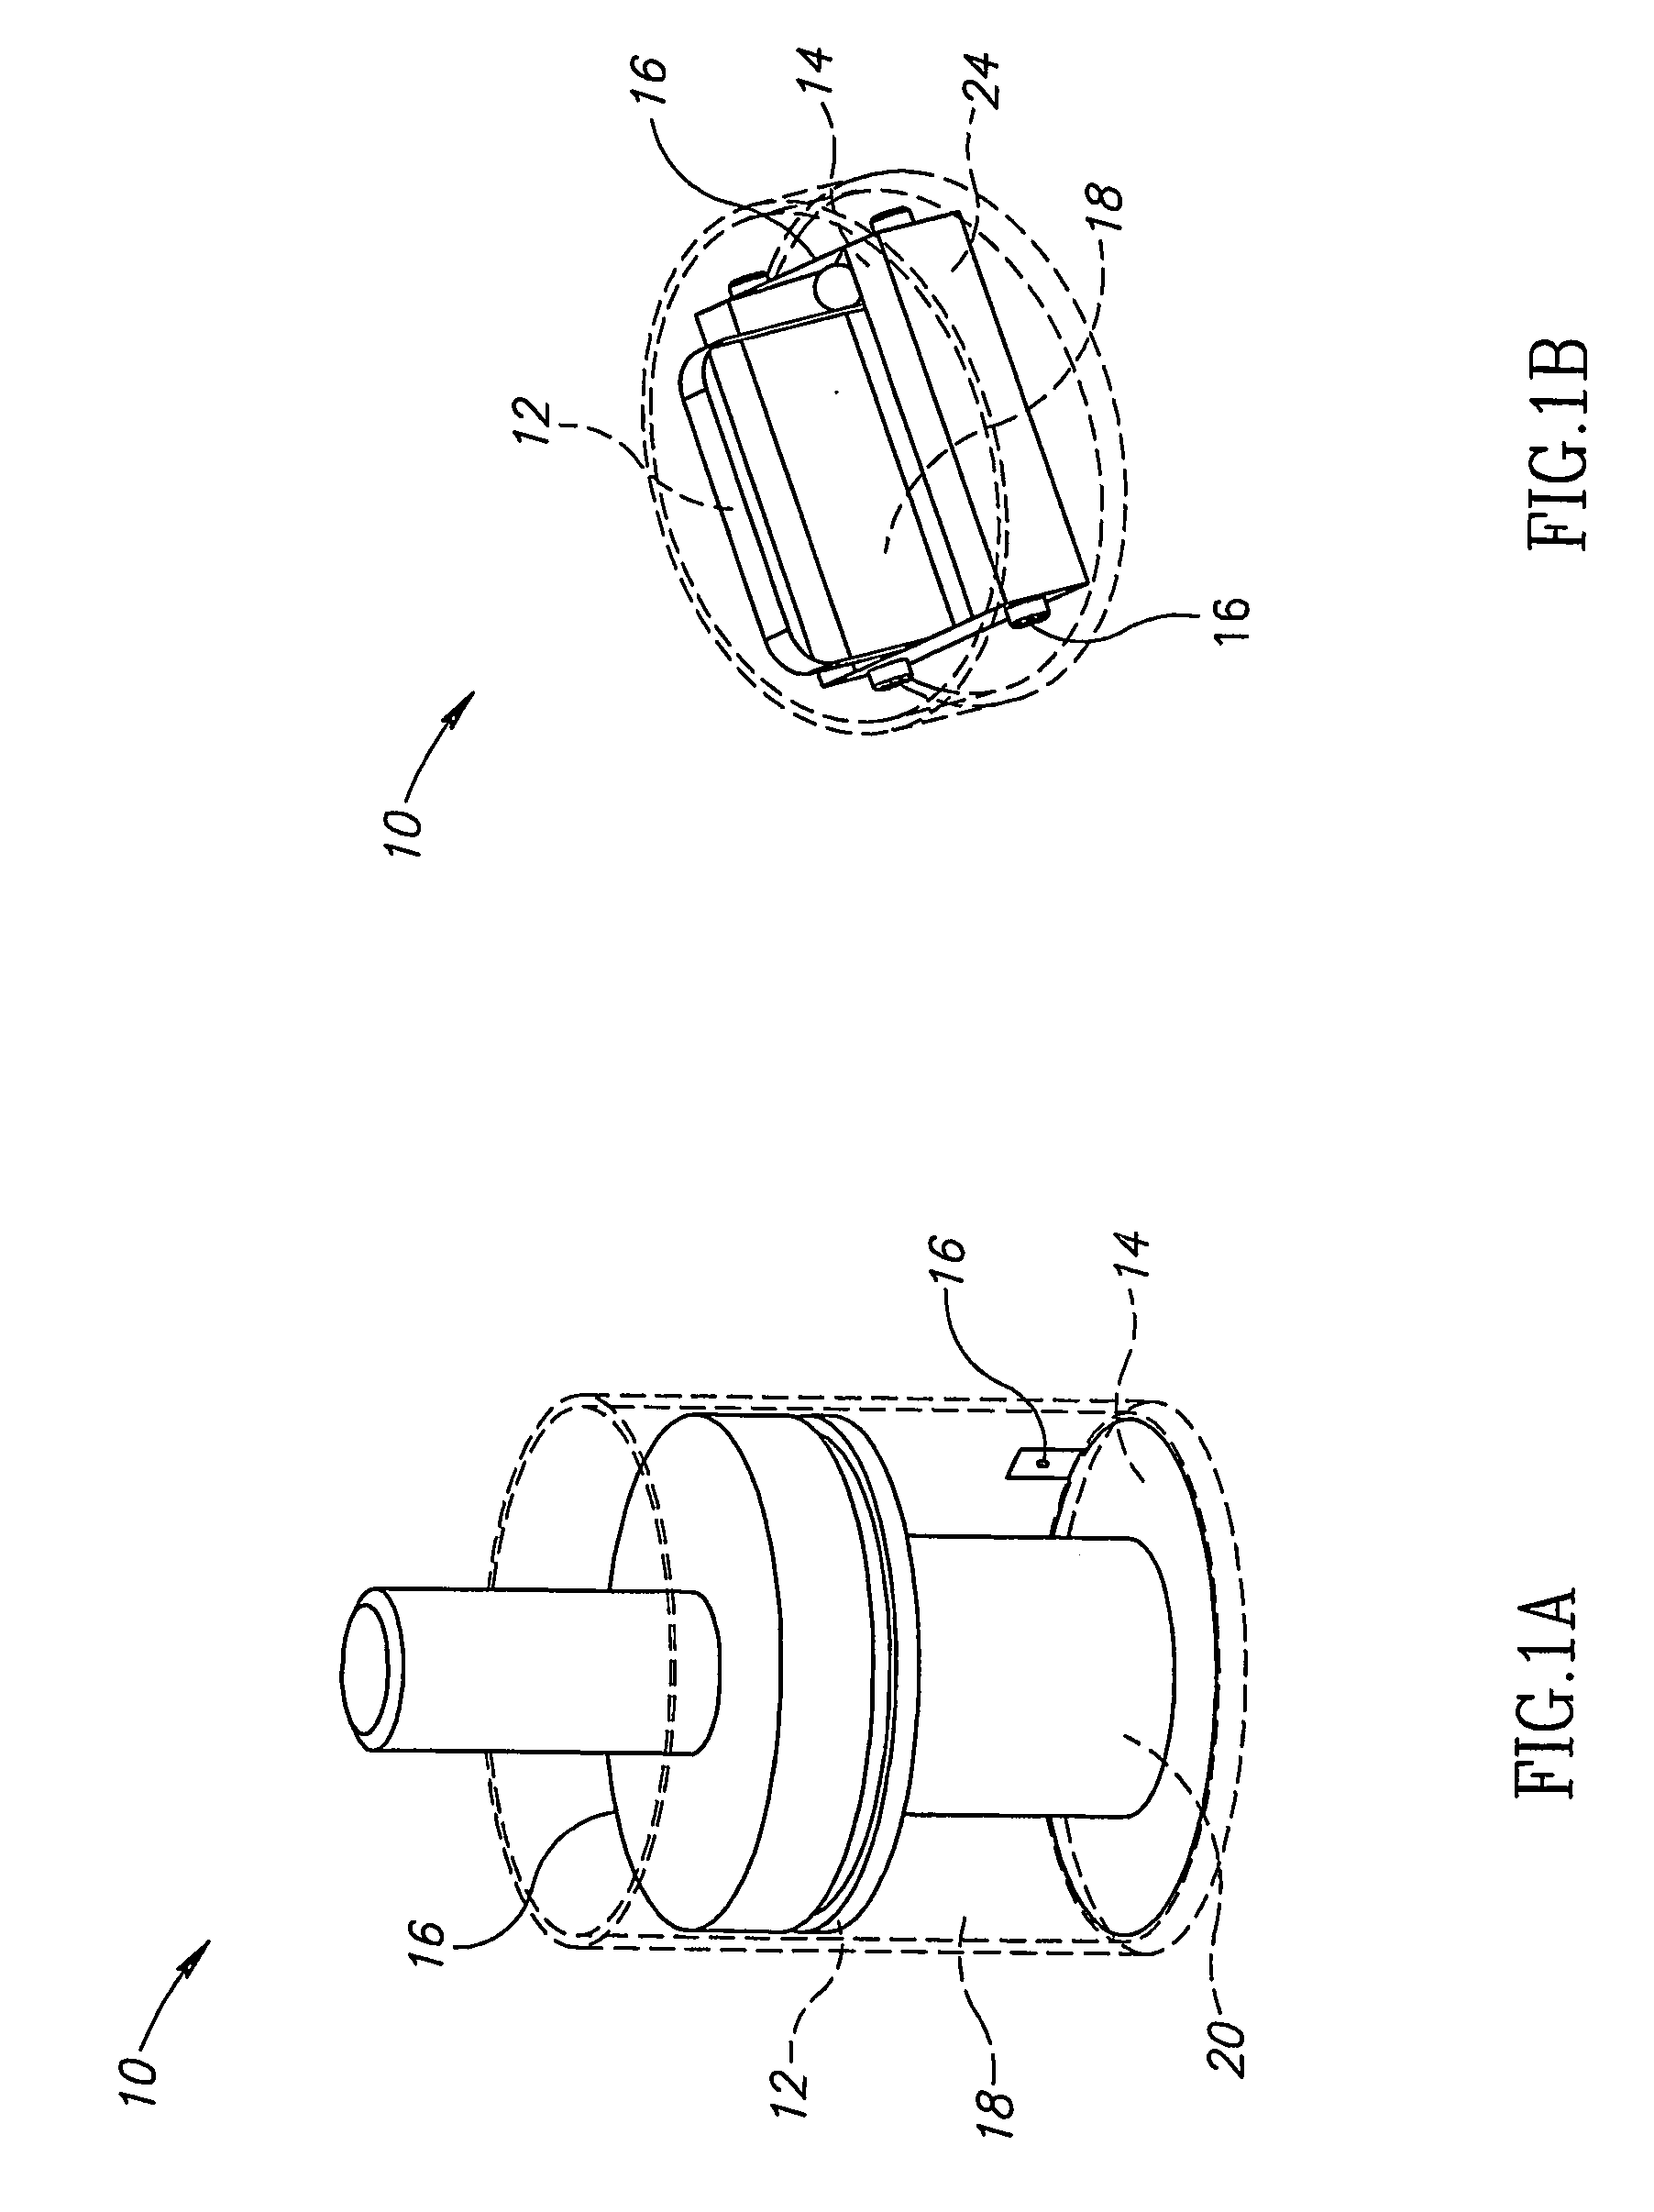 System and method for treating biological tissue usiing curret electrical field